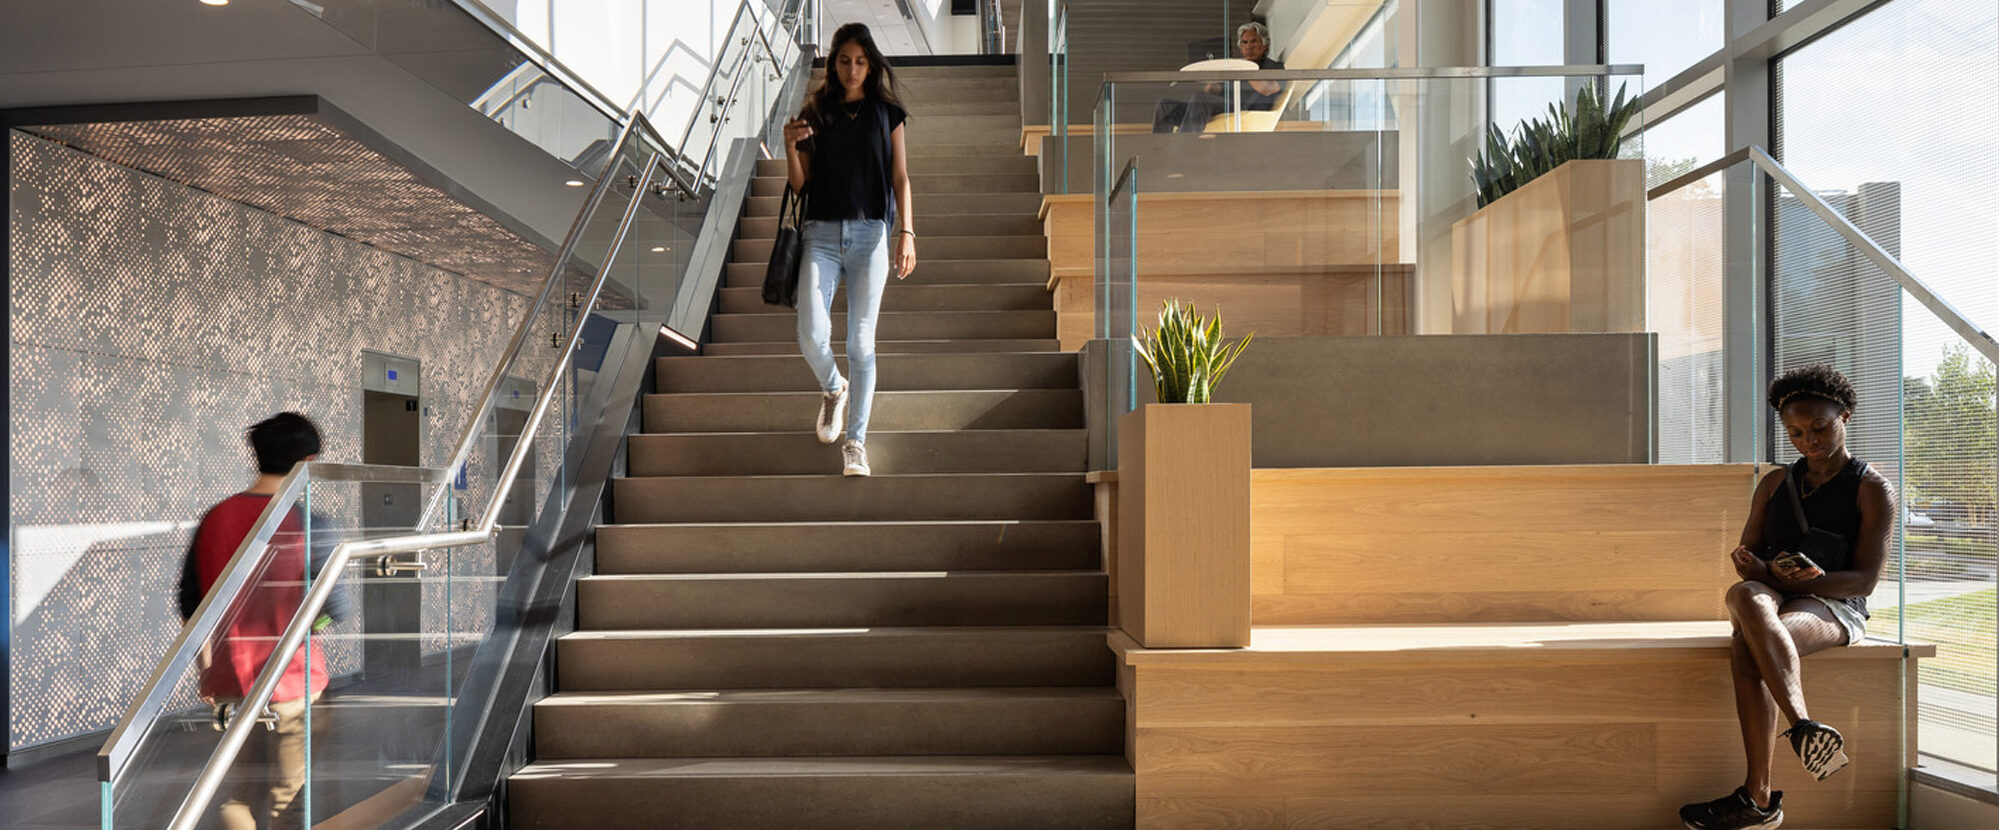 Modern staircase intersects with wooden seating steps in a light-filled atrium, as individuals engage with the multi-functional space, showcasing a blend of functionality and design aesthetics.